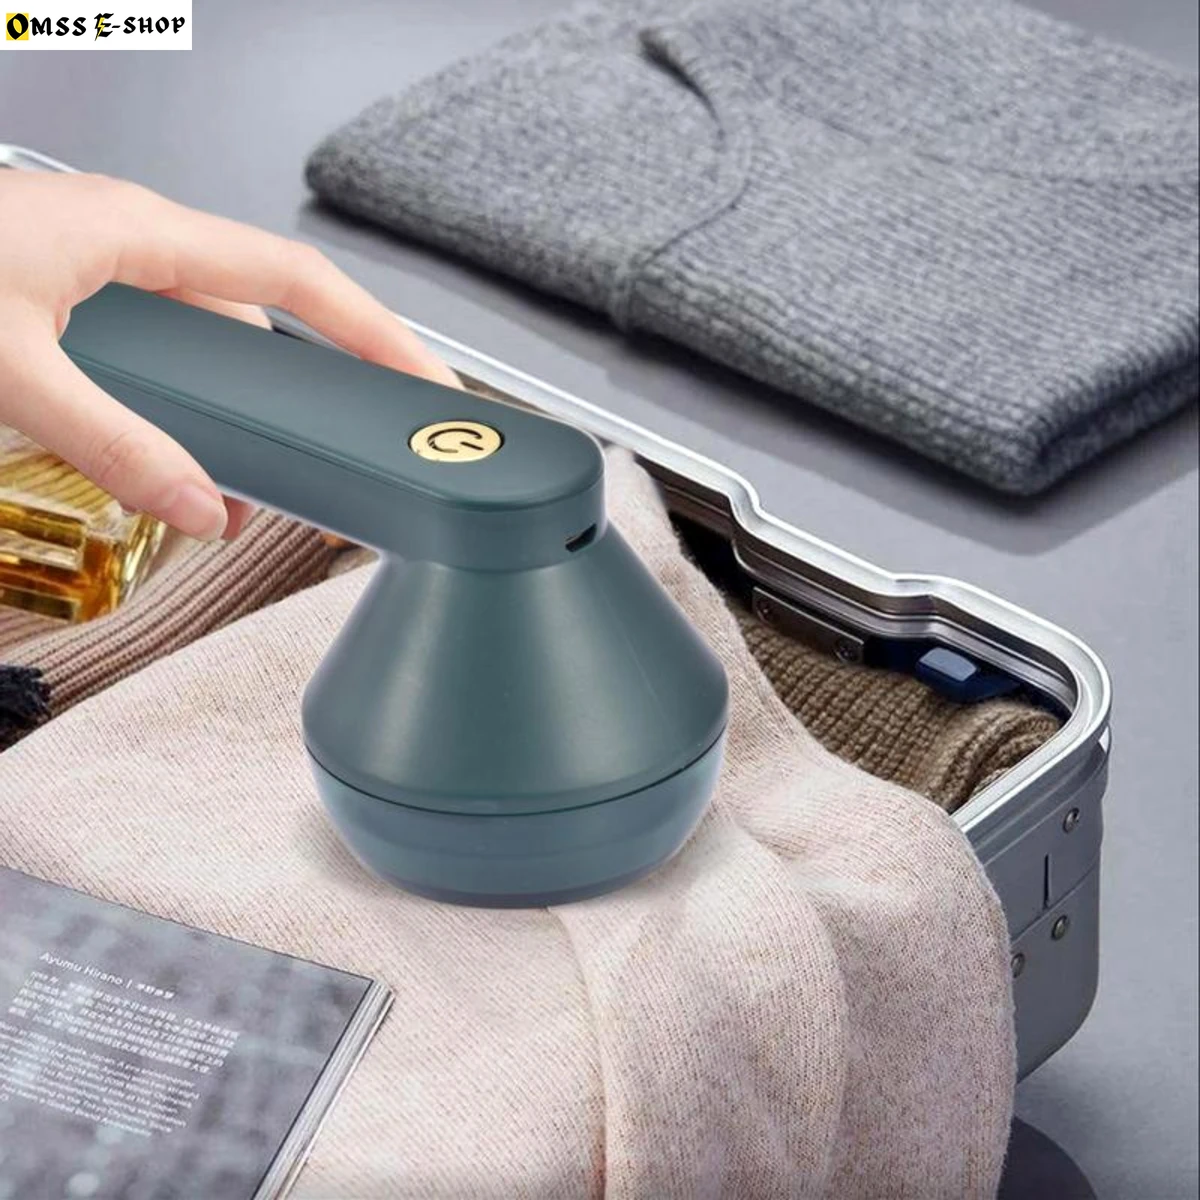 Lint Remover HairBall Trimmer Portable Fuzz Fabric Shaver Sweater Defuzzer With Replaceable Stainless Steel Blade Home Gadgets